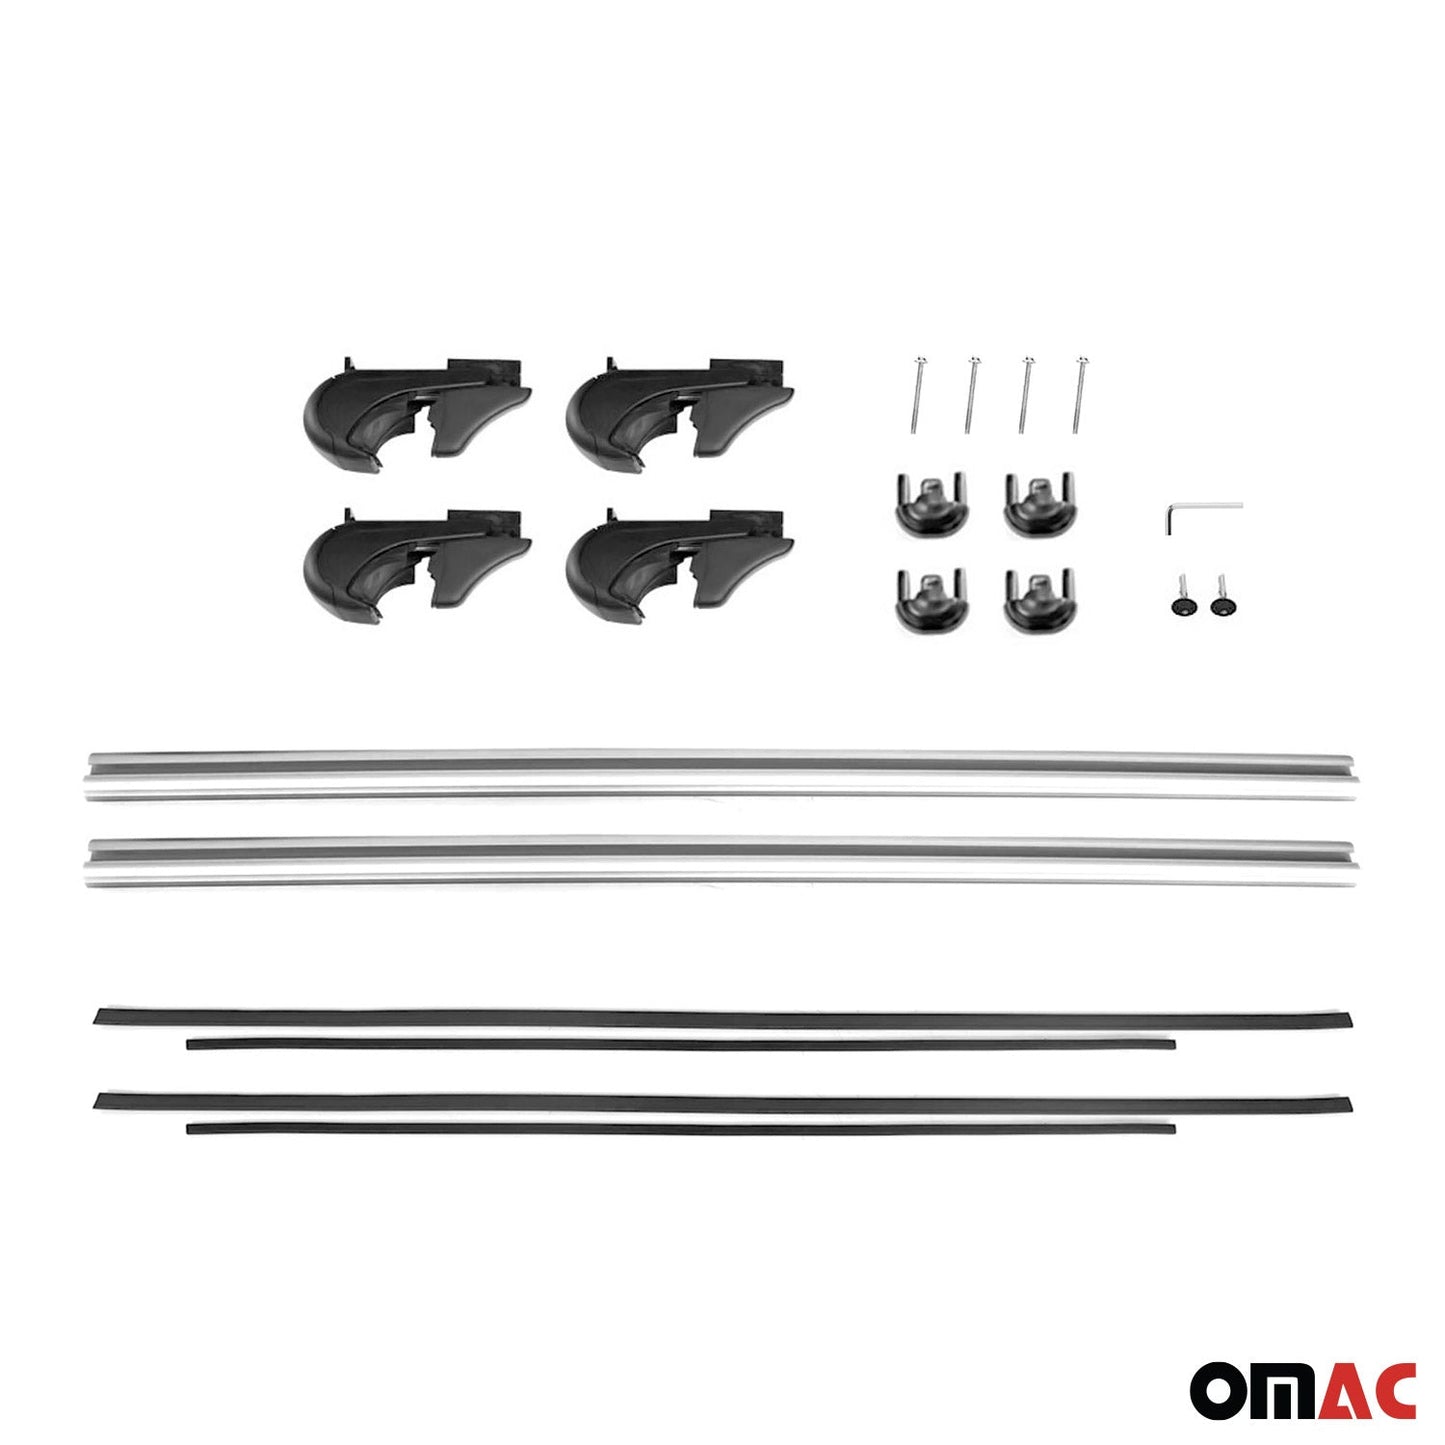 OMAC Lockable Roof Rack Cross Bars Luggage Carrier for Audi A4 Allroad 2006-2016 Gray 11049696929L